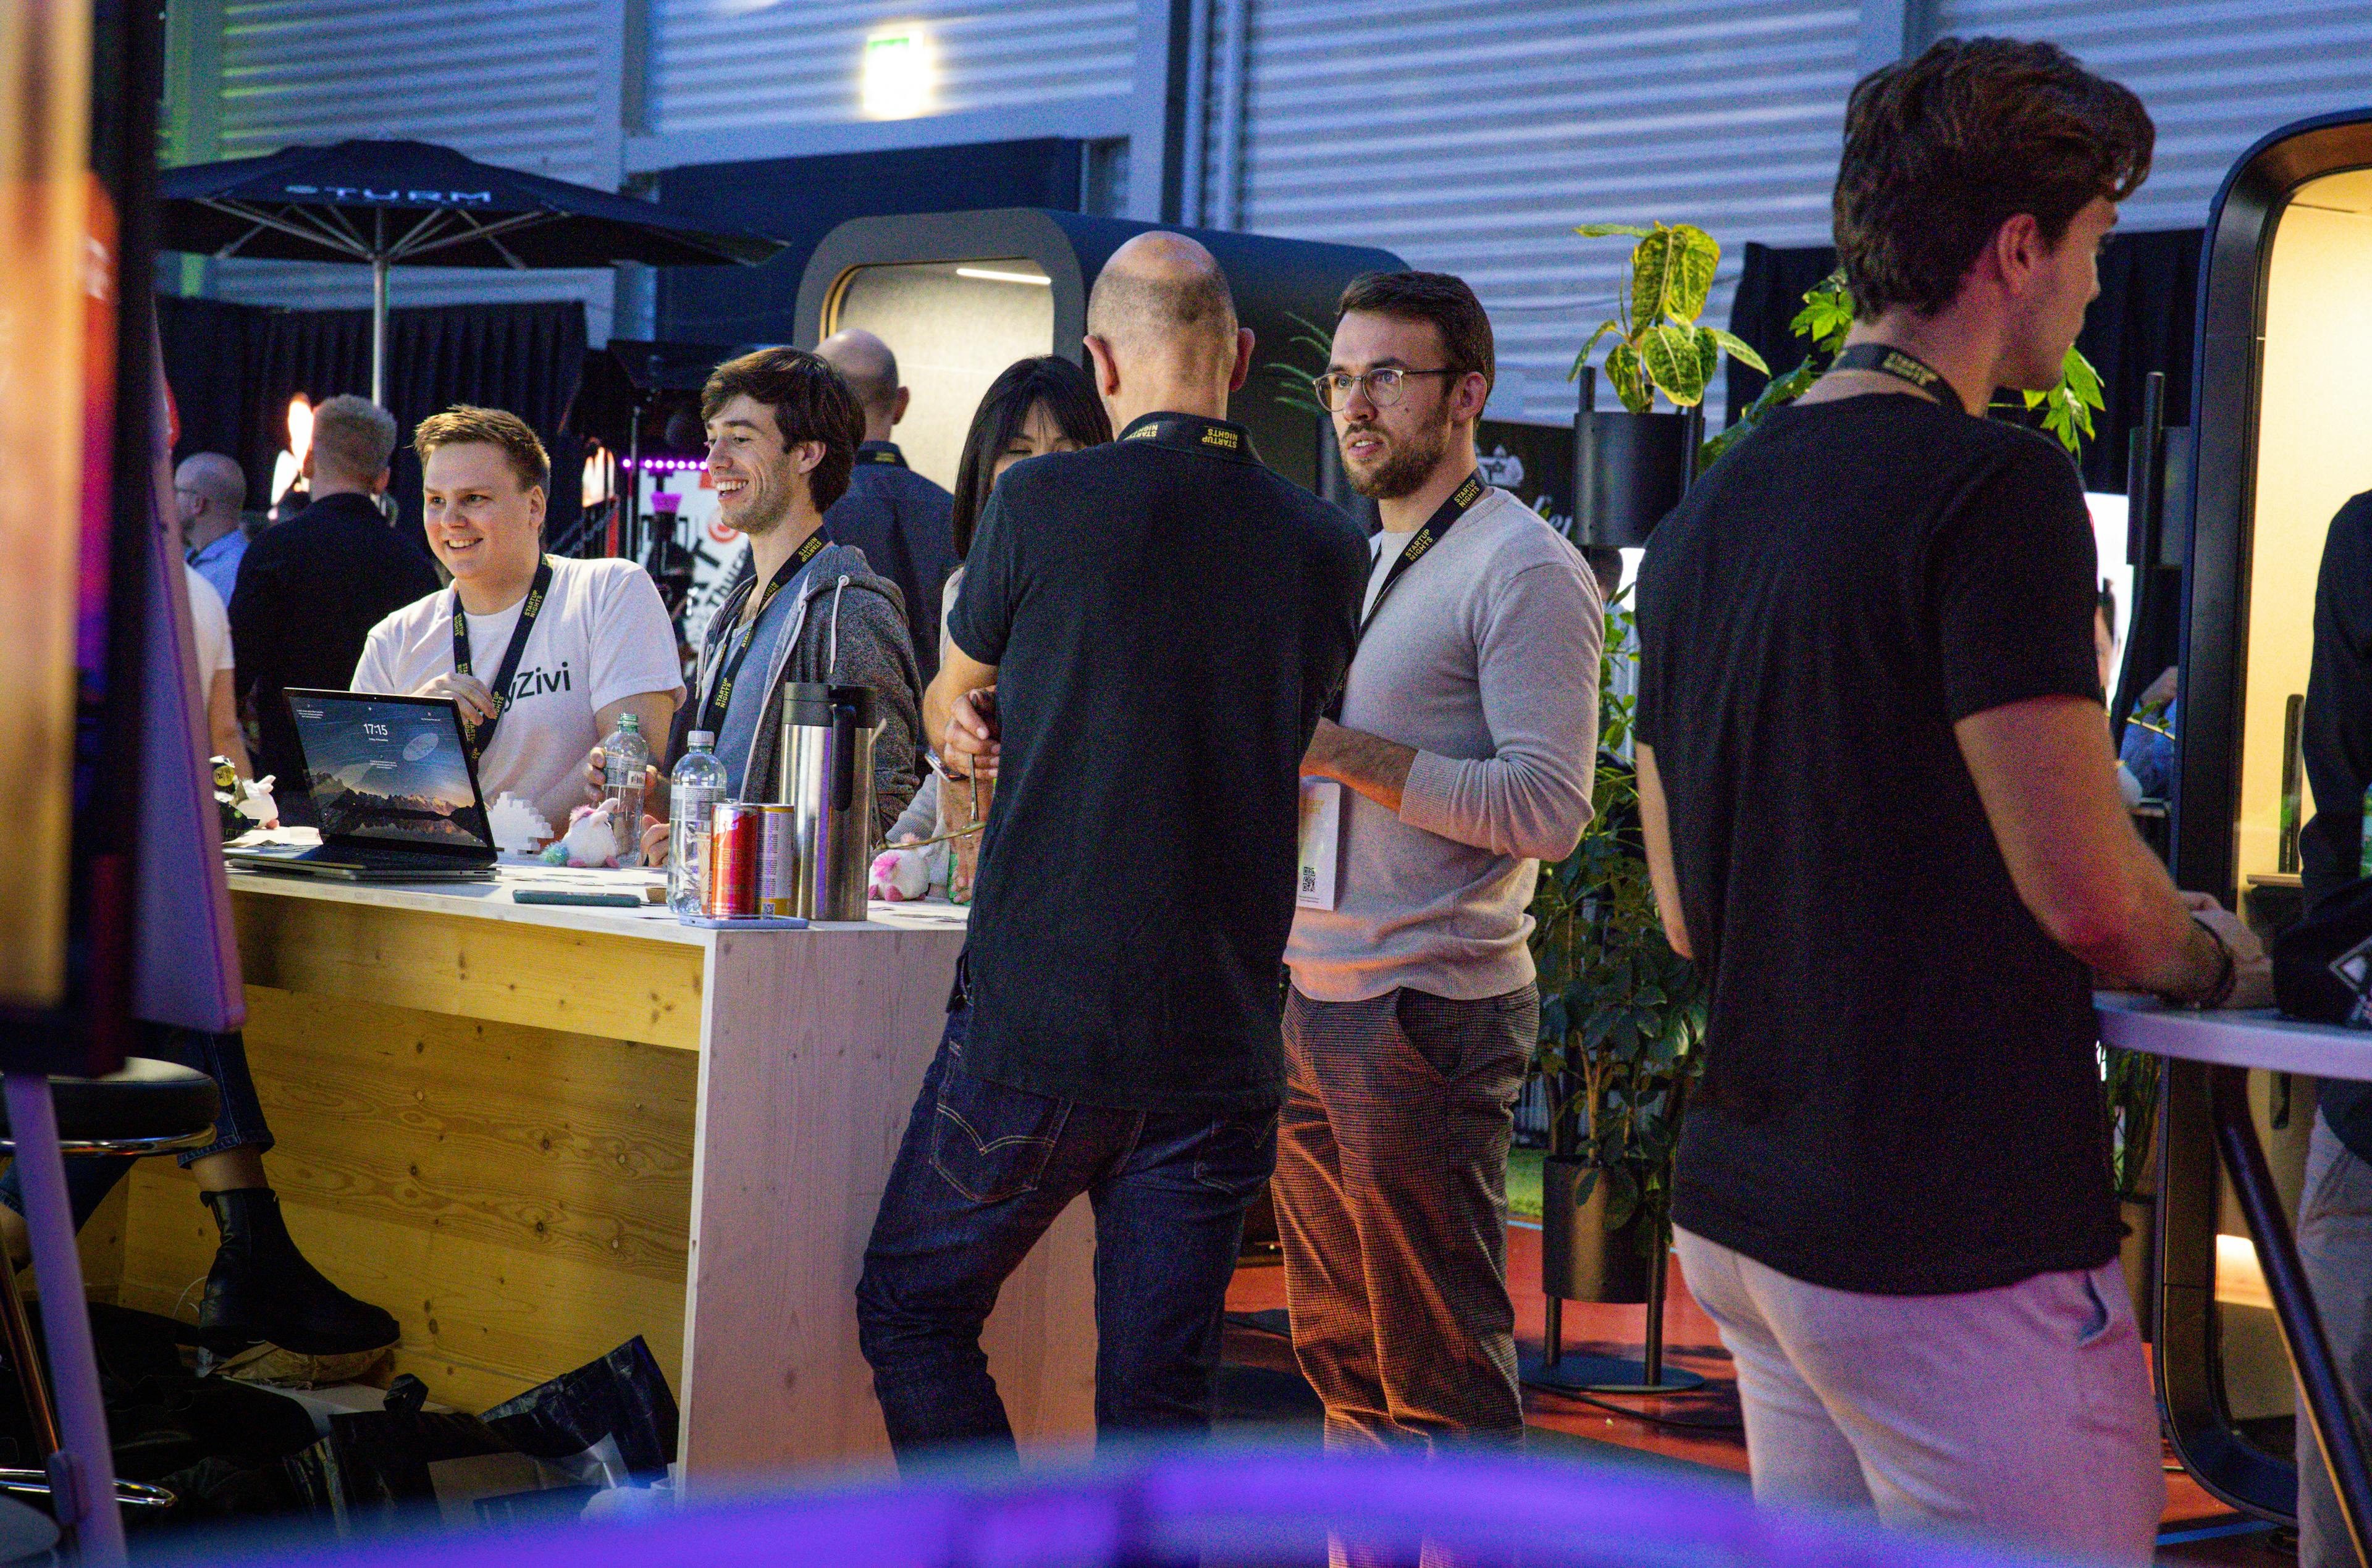 Attendees at a startup booth